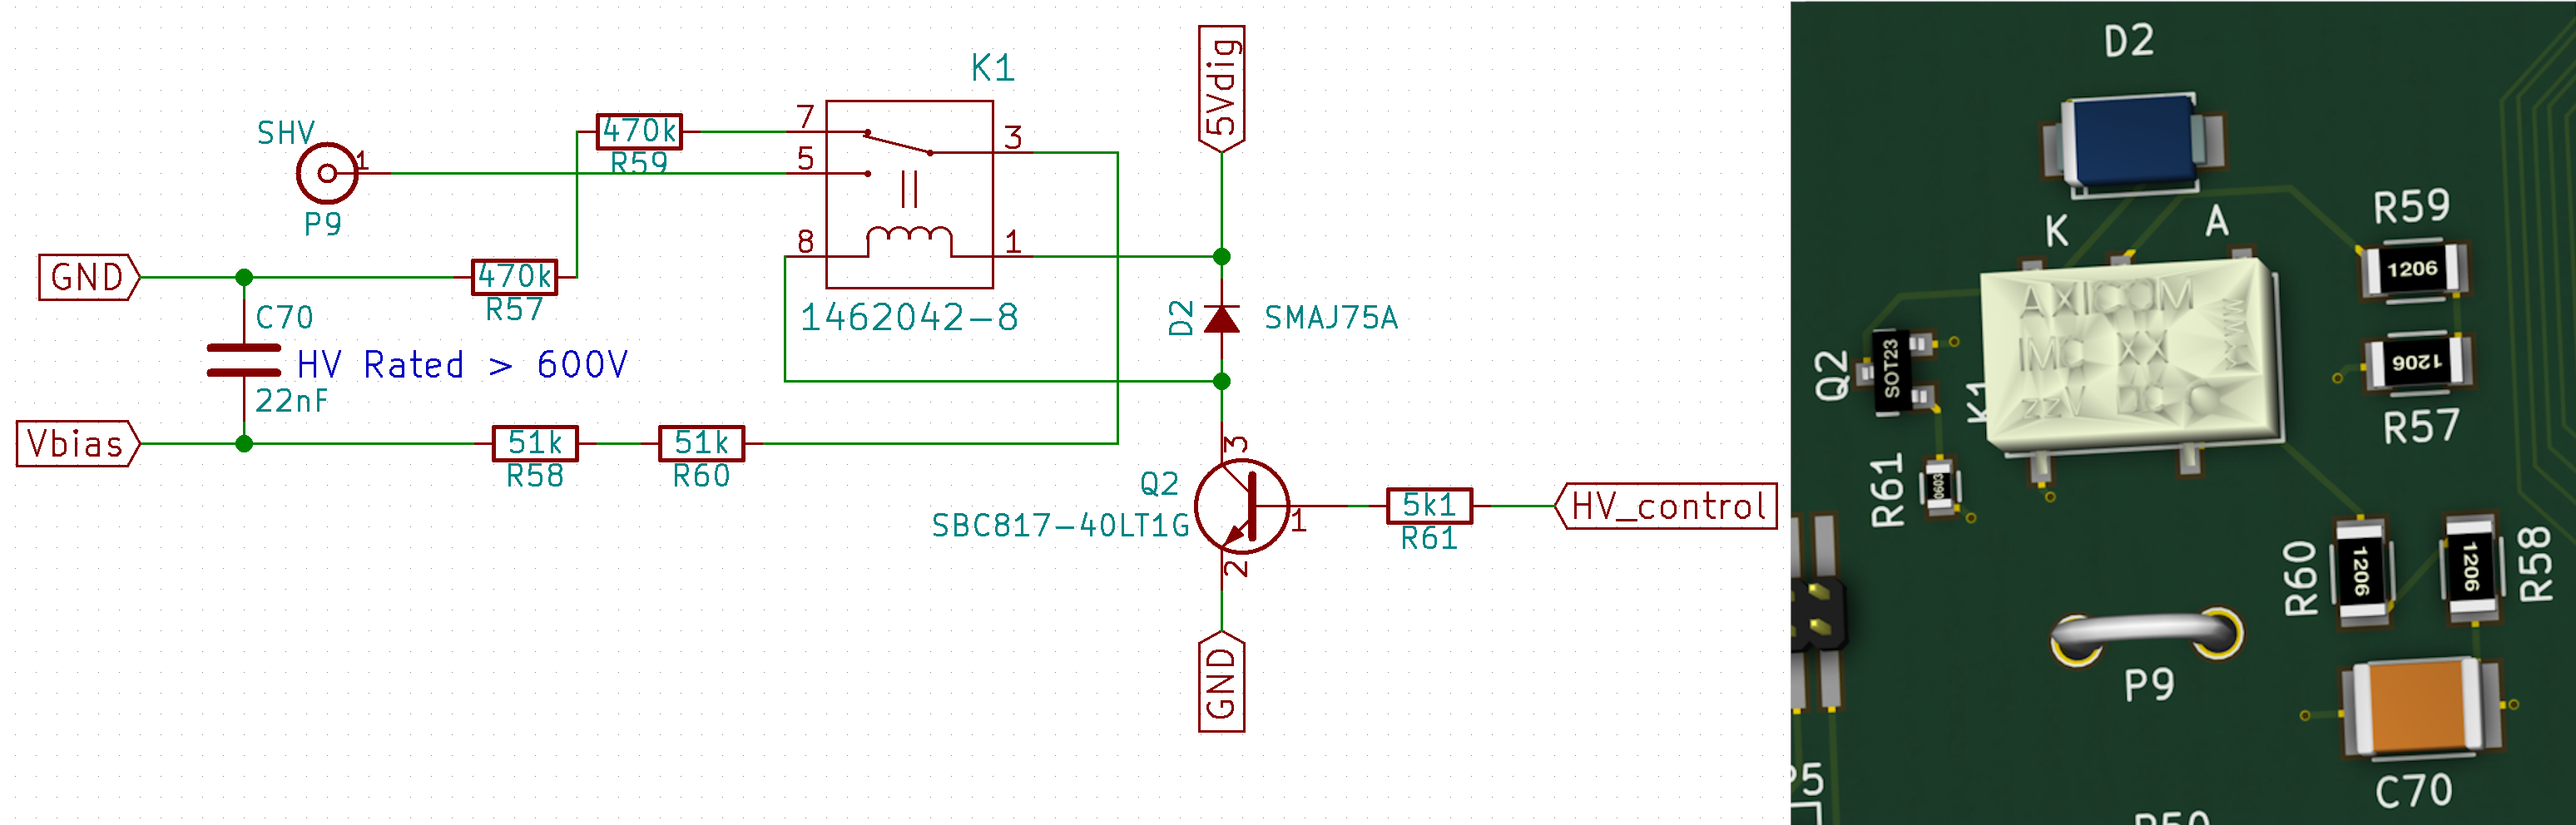 Bias voltage control. High voltage is supplied by an external source and connected to the board via a chassis mounted SHV connector. A mechanical relay, controled by a signal coming from the FPGA, controls whether bias voltage gets supplied to the micro-strip detectors. Large value serial resistors are used to limit any potential shock hazard.